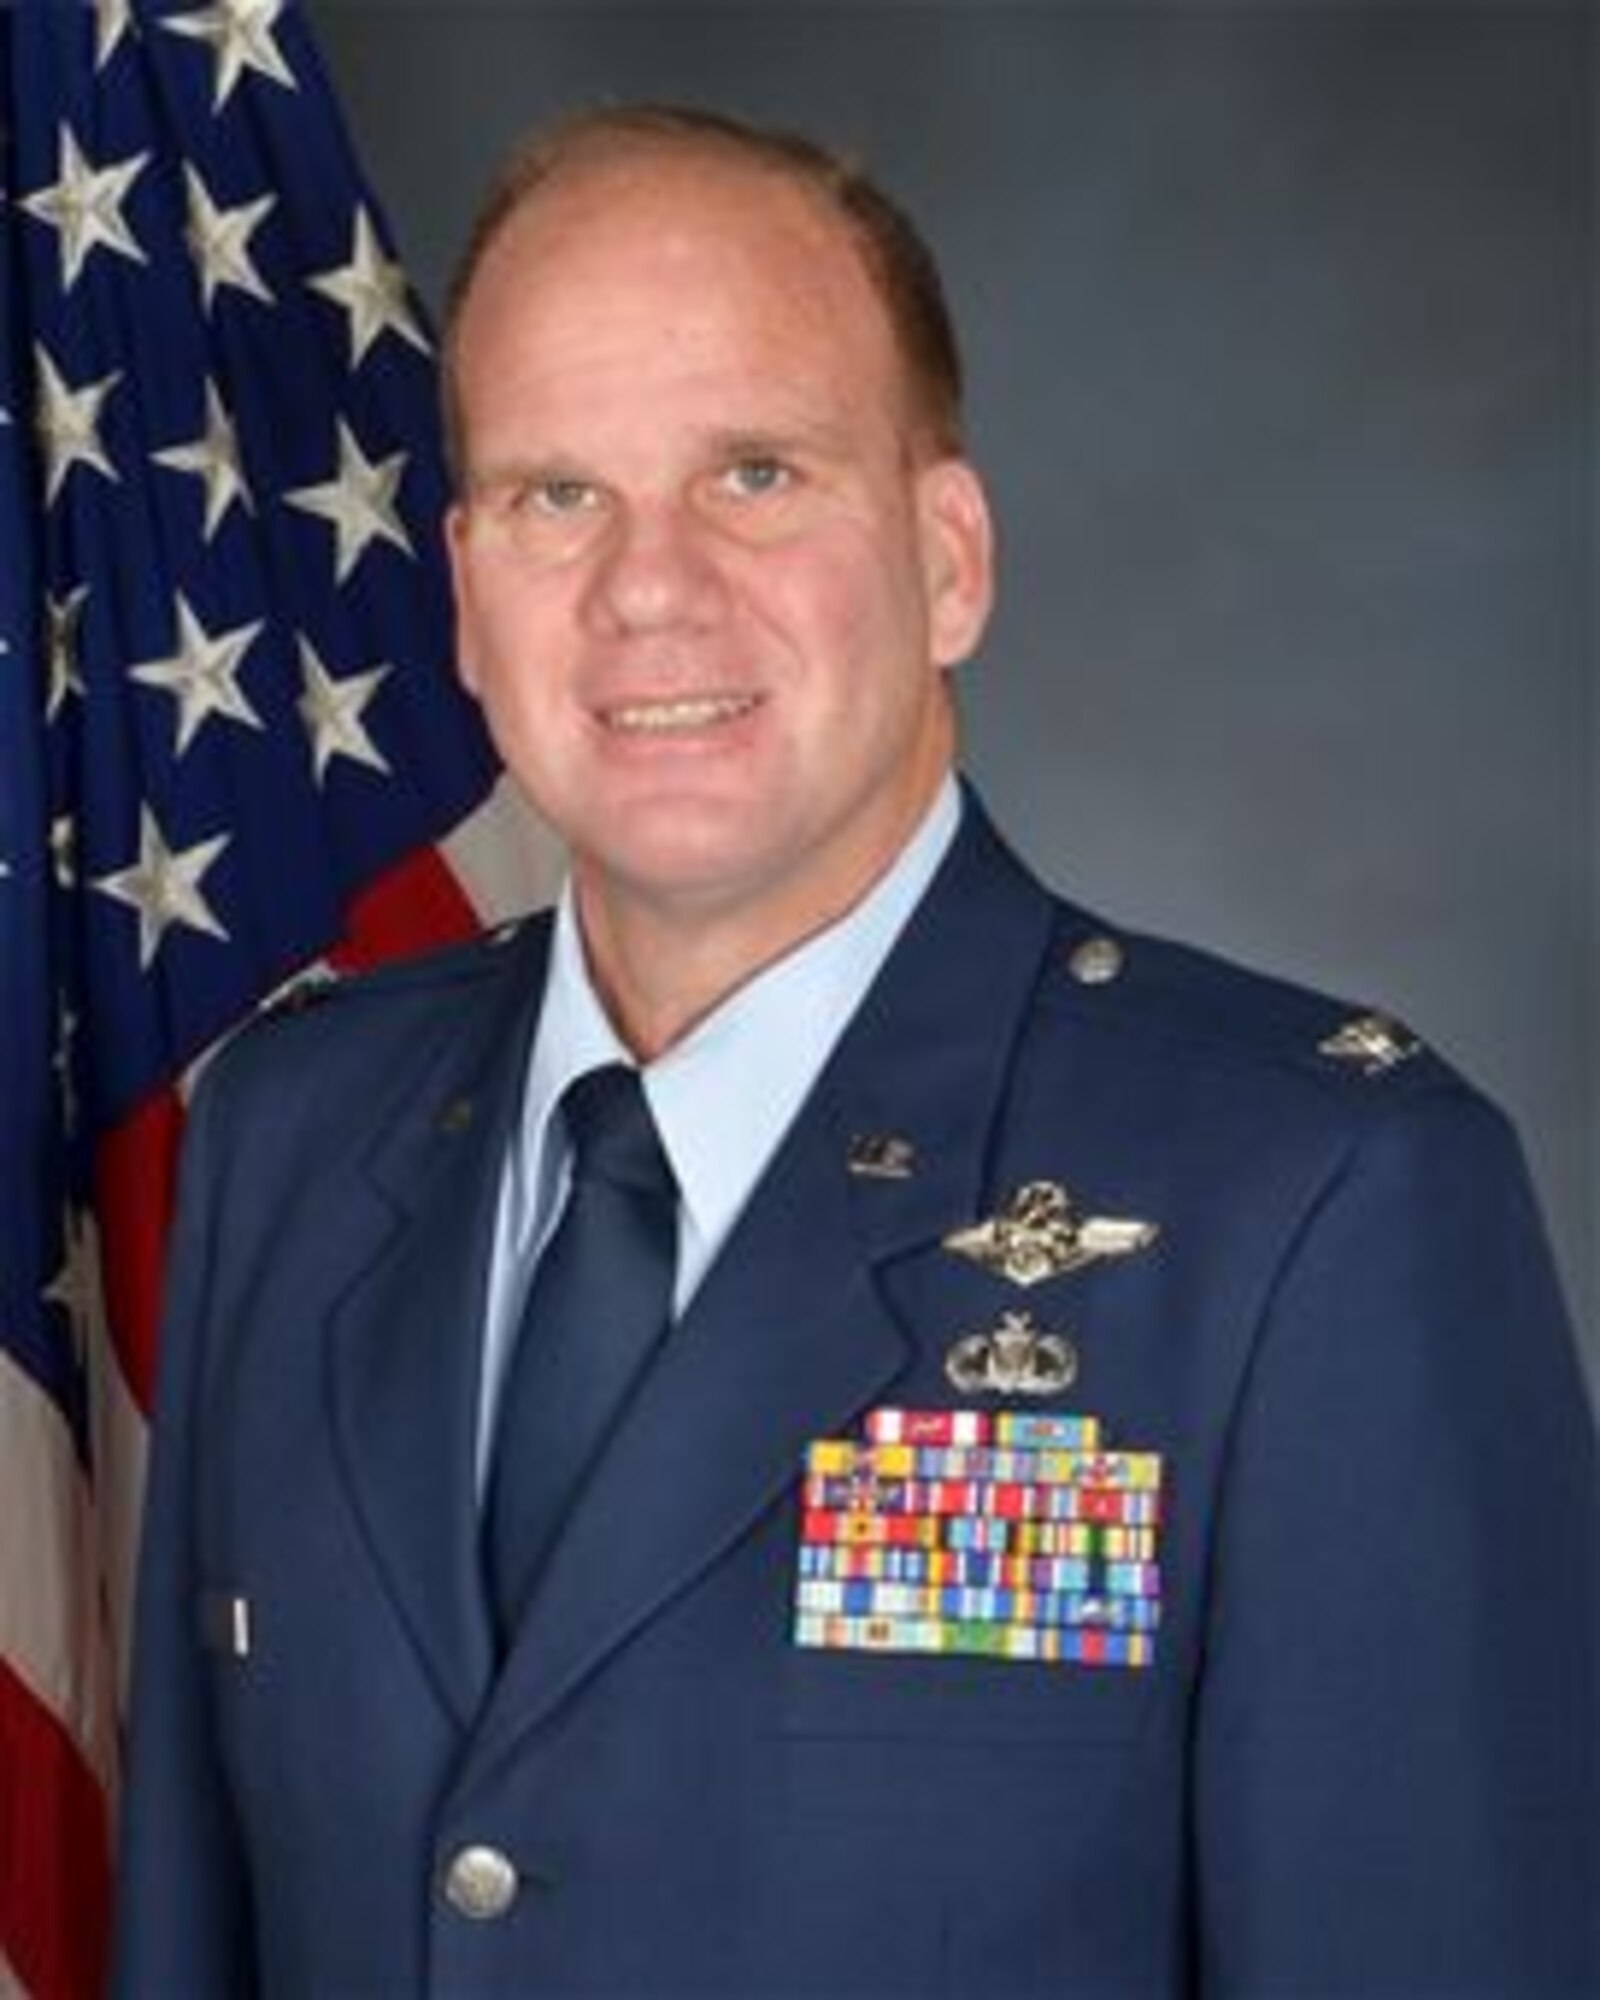 Col. David R. Robertson's official photo, taken Dec. 12, 2013. Robertson is the commander of the 513th Air Control Group.